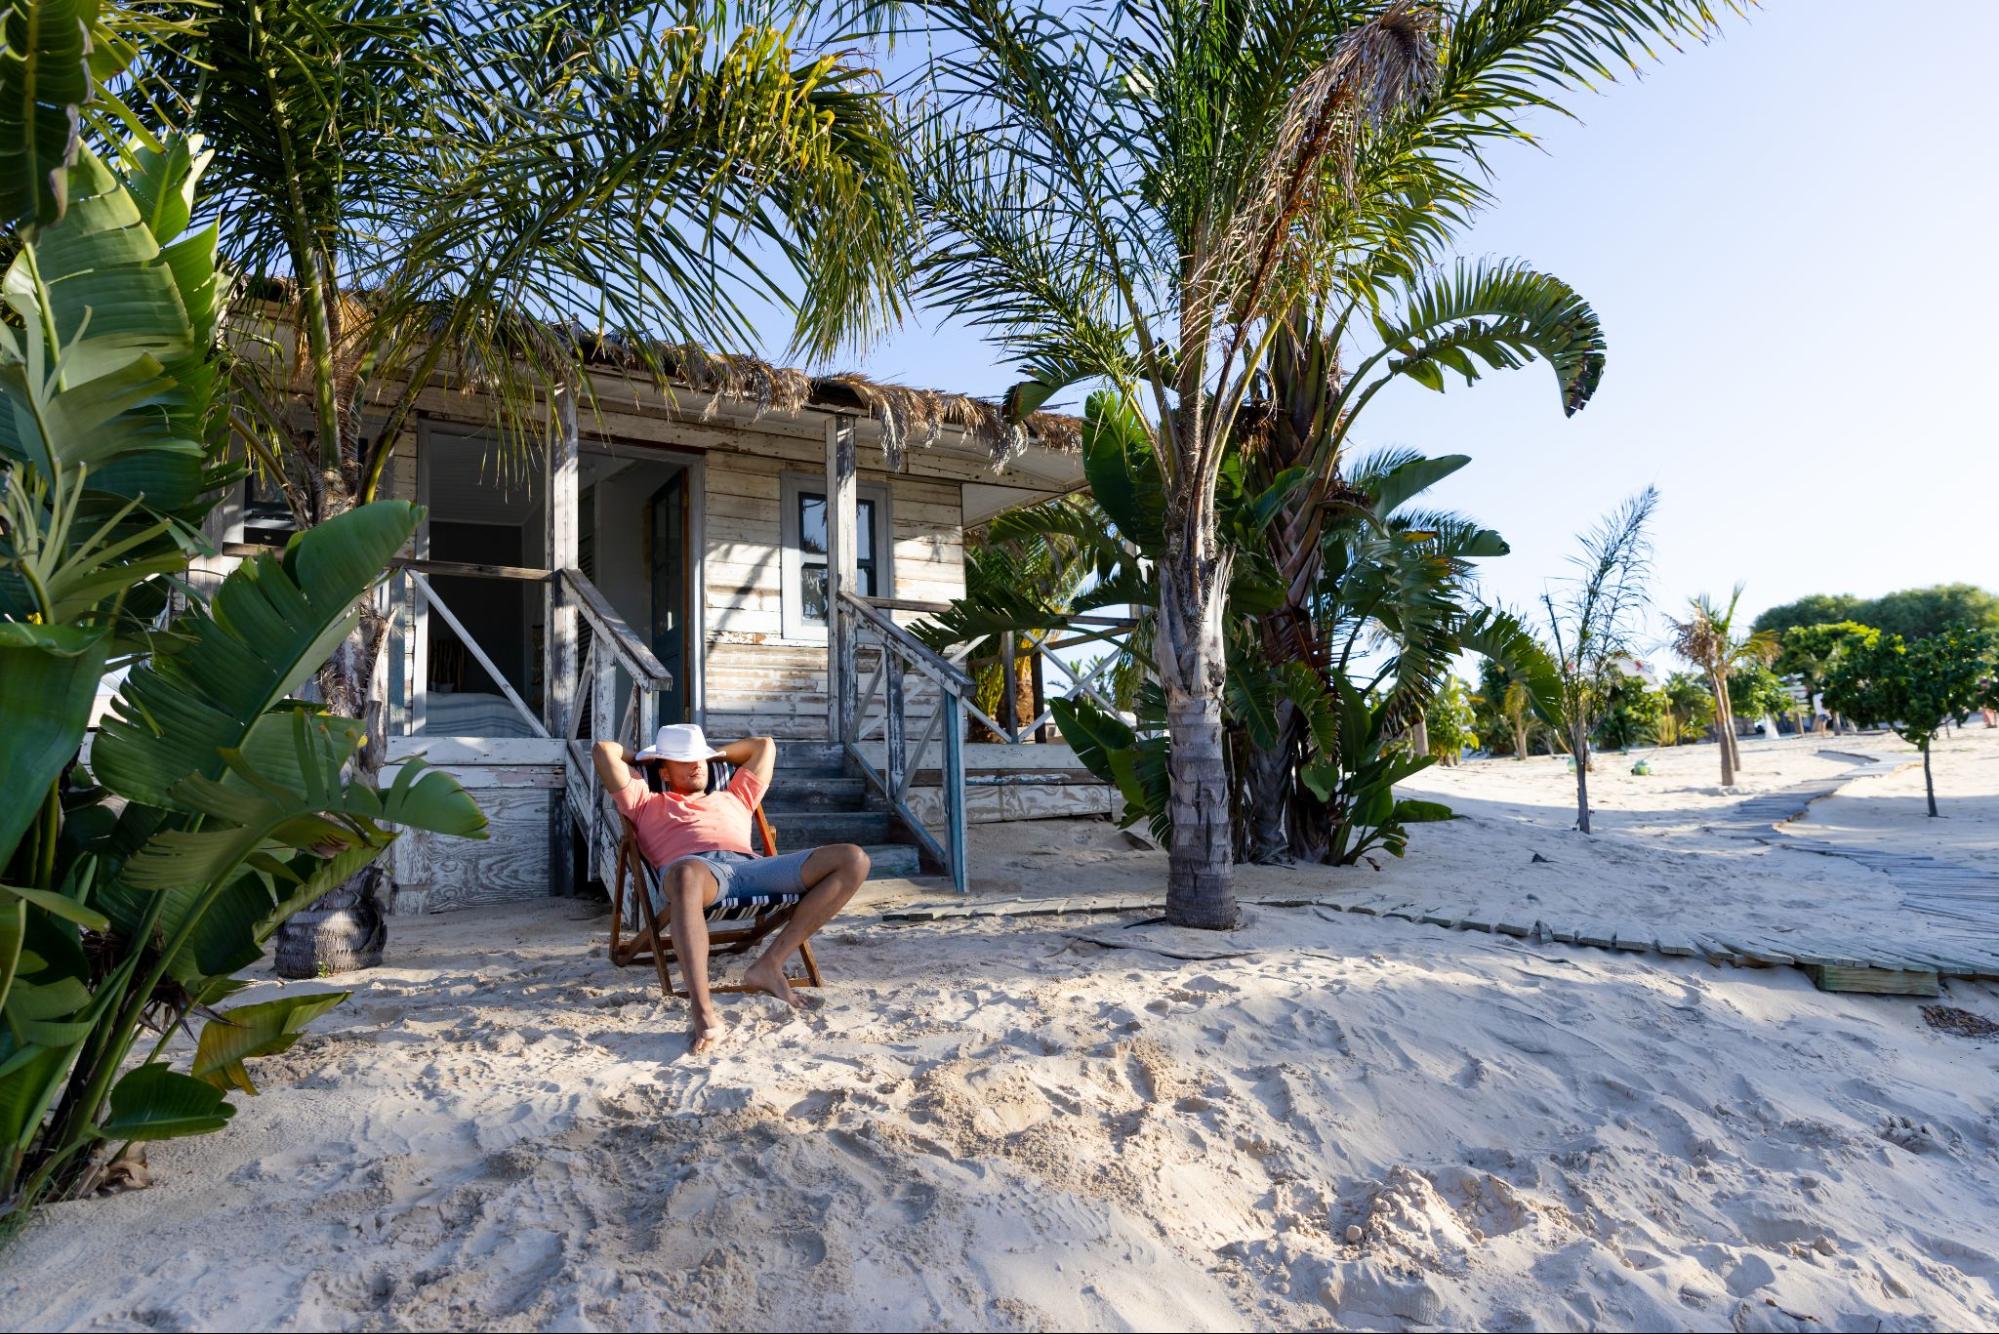 A young Caucasian man sits on a deck chair outside a rustic cottage, his hat covering his face. The setting is serene, surrounded by palm trees and white sand at the beach.